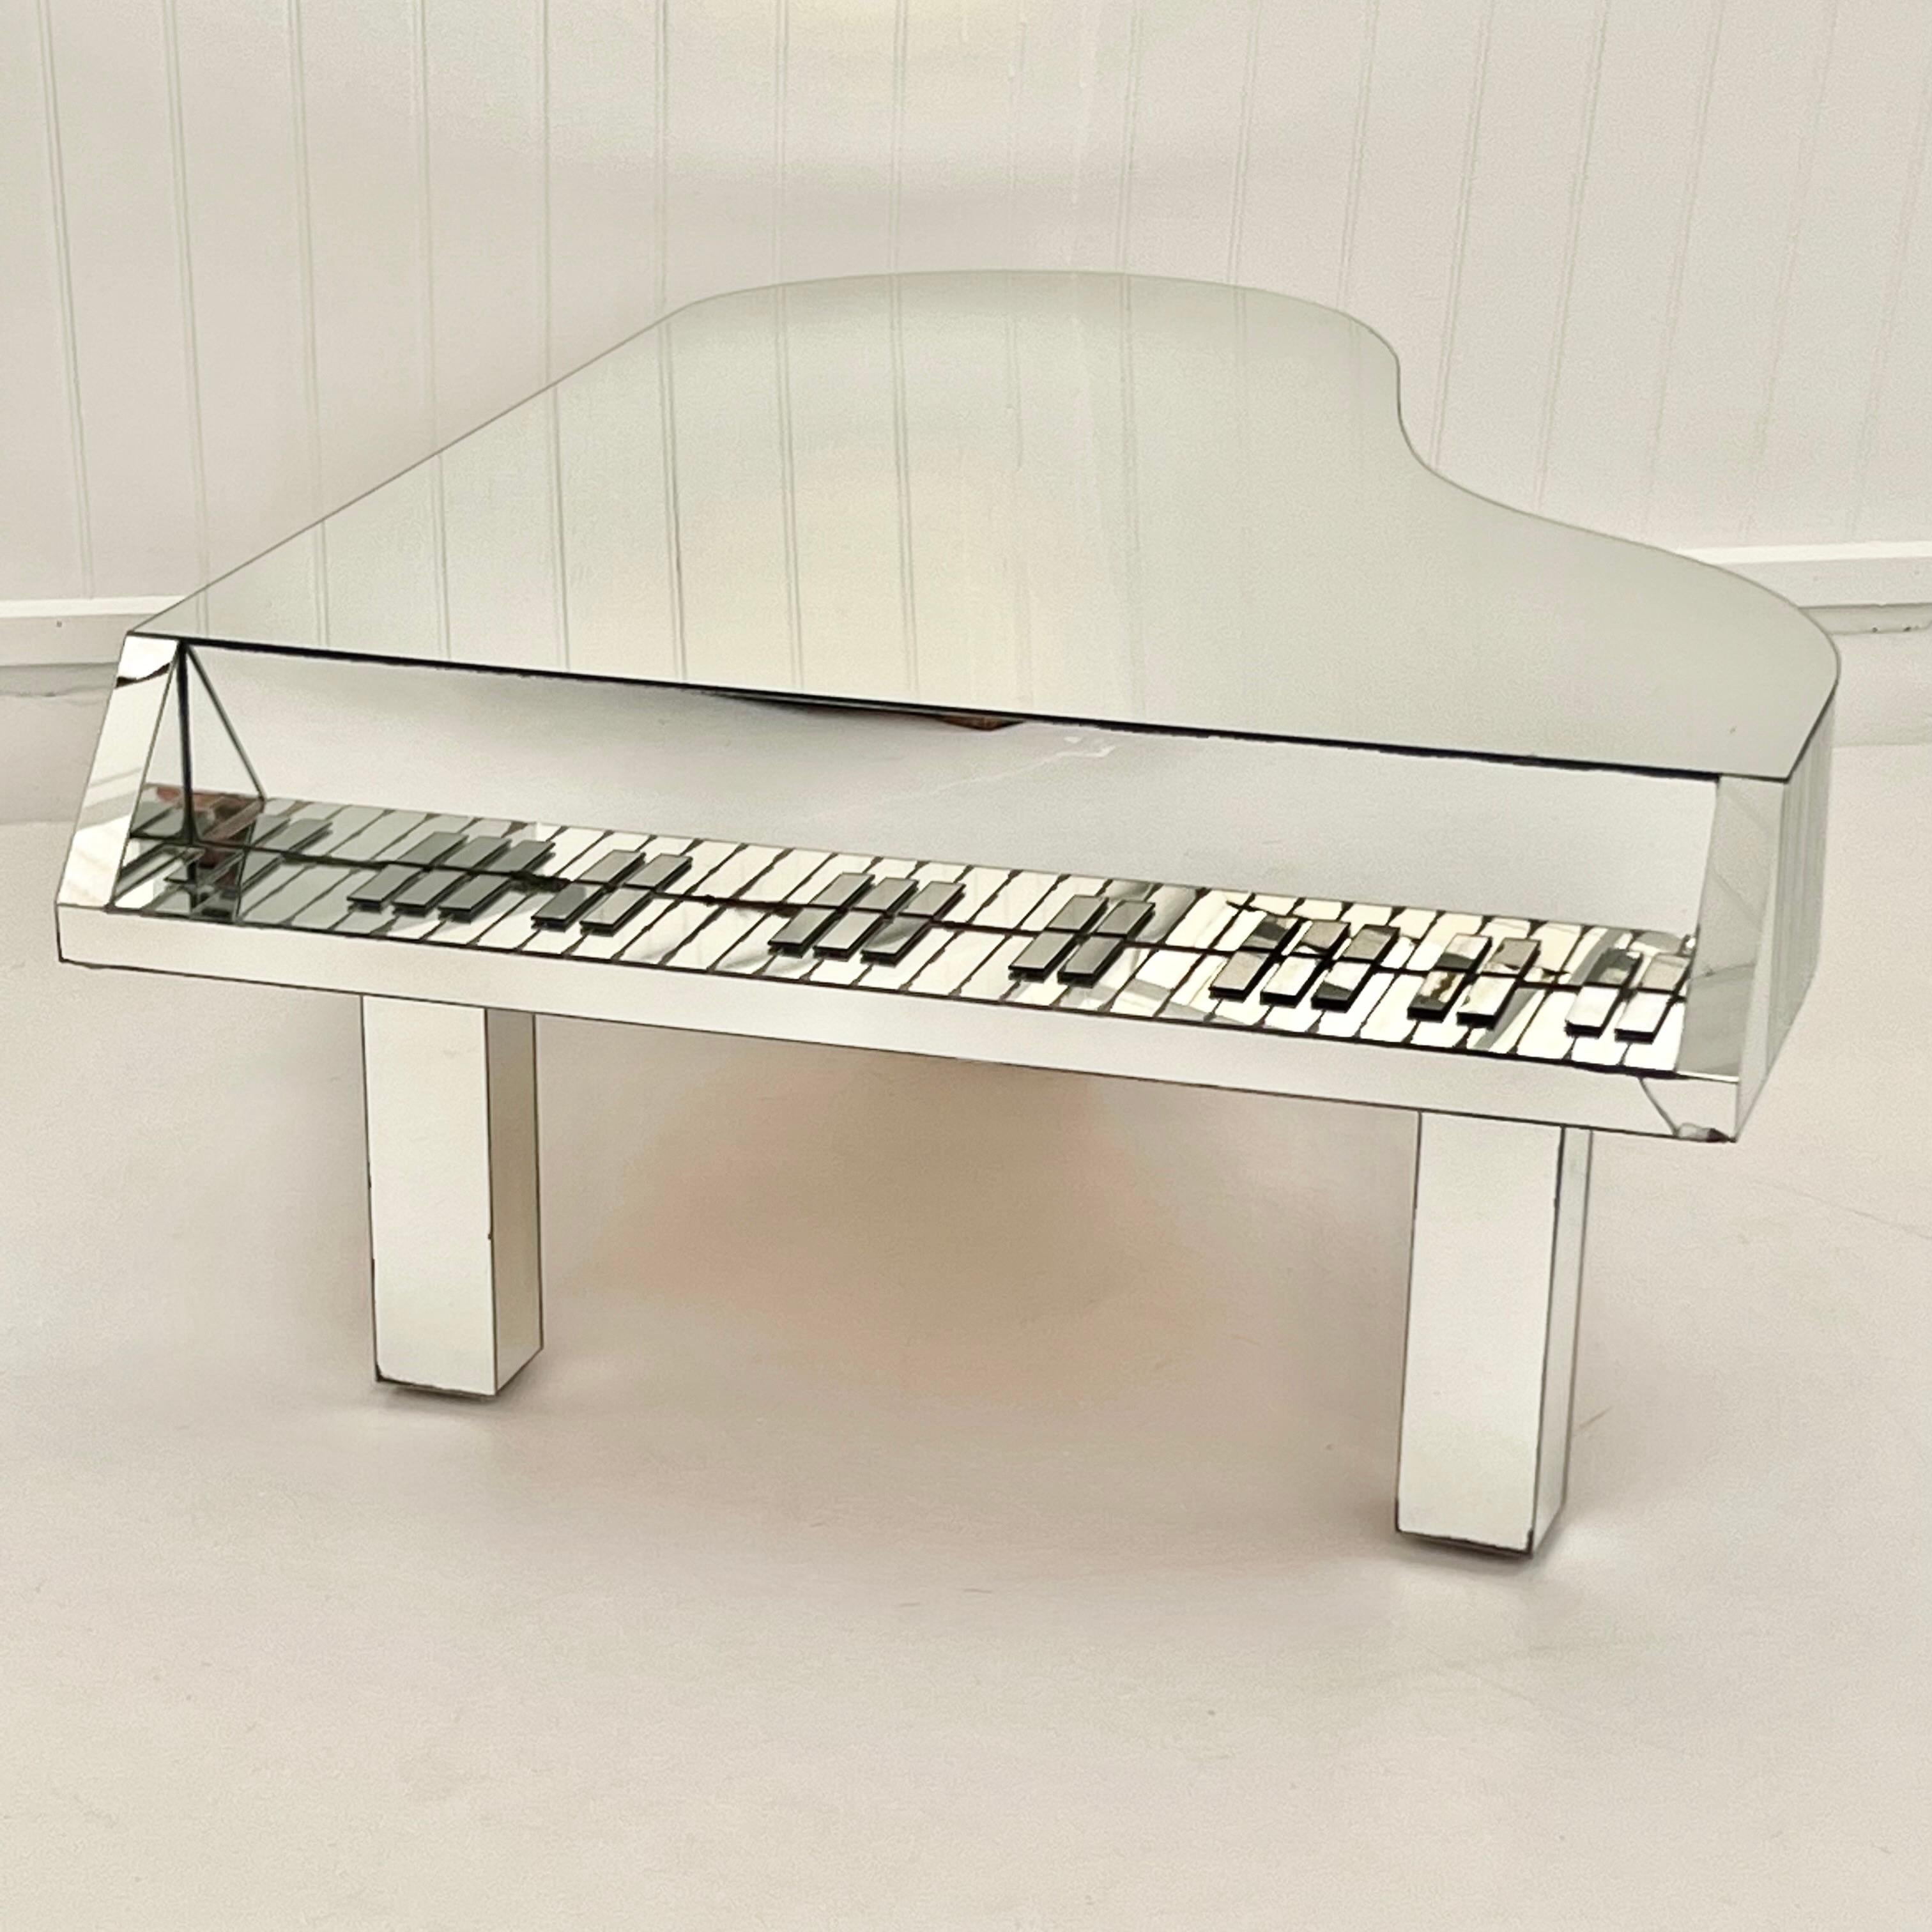 Wonderfully eccentric, piano-shaped coffee or cocktail table, made of mirrored glass, circa 1970s. Adds a touch of pop-art, opulence and eccentricity to any home interior. 

One single sheet of glass makes up the top while the sides and keys are